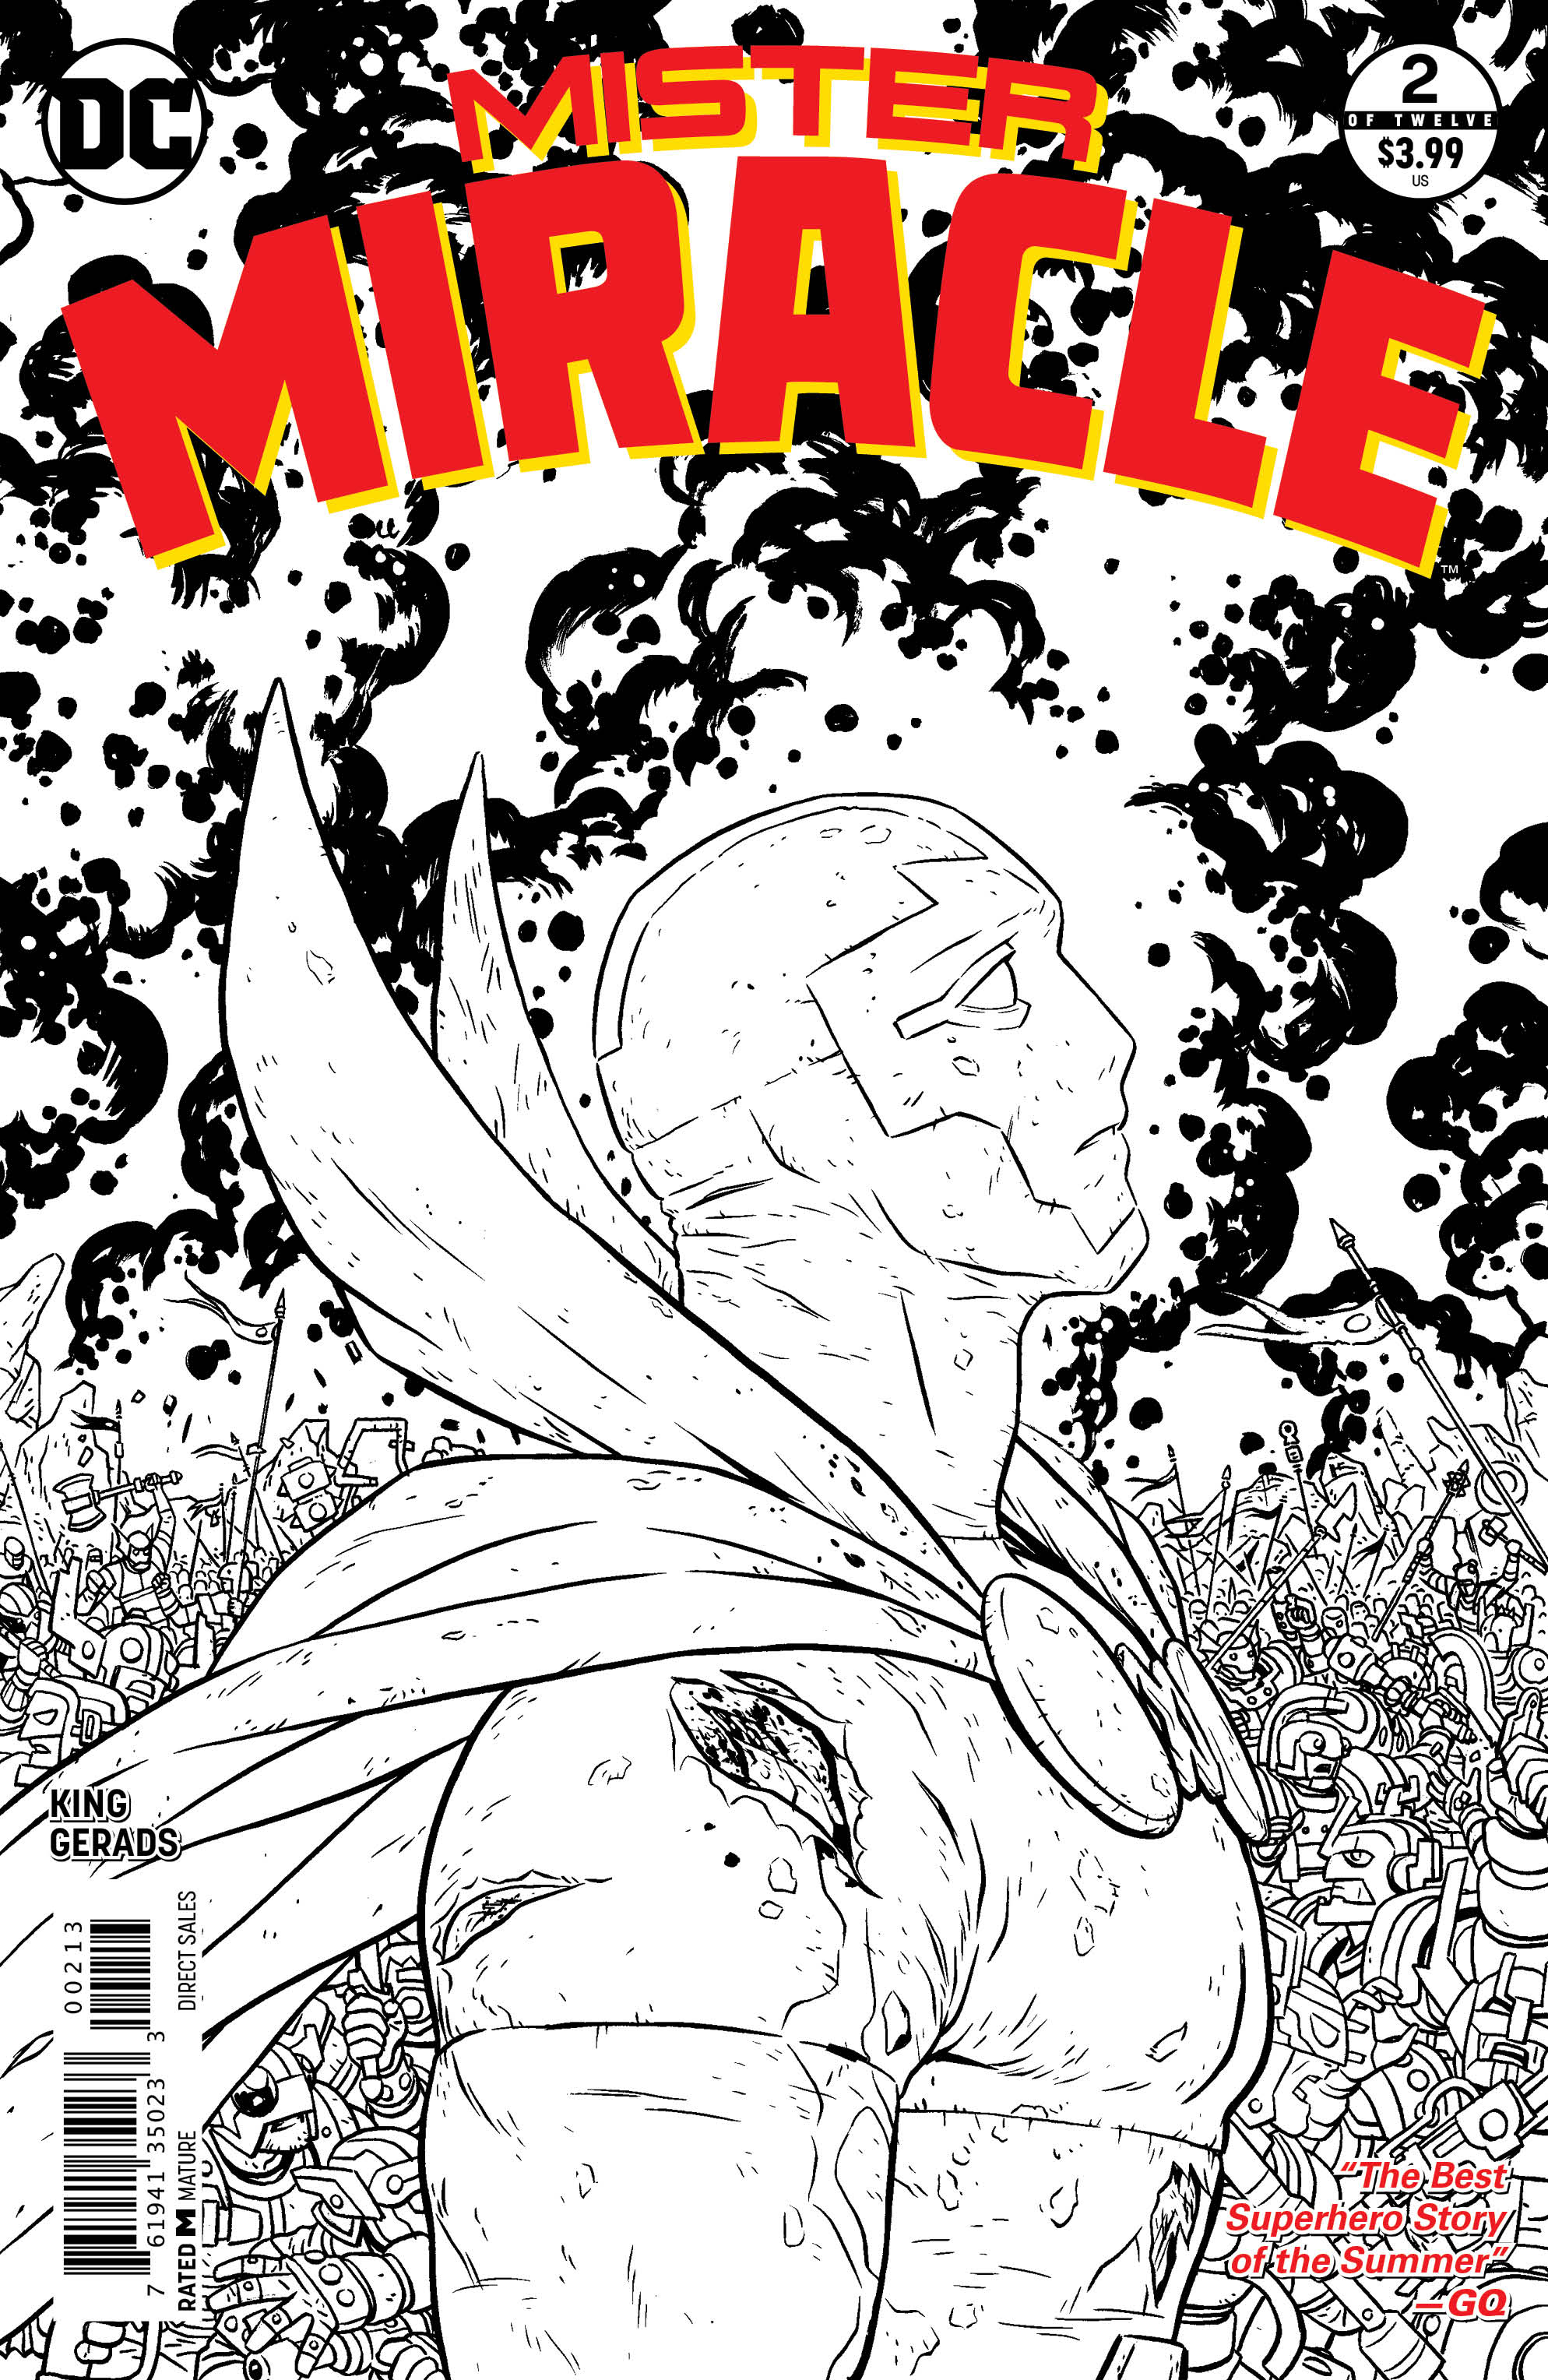 MISTER MIRACLE #2 (OF 12) 3RD PTG (MR)